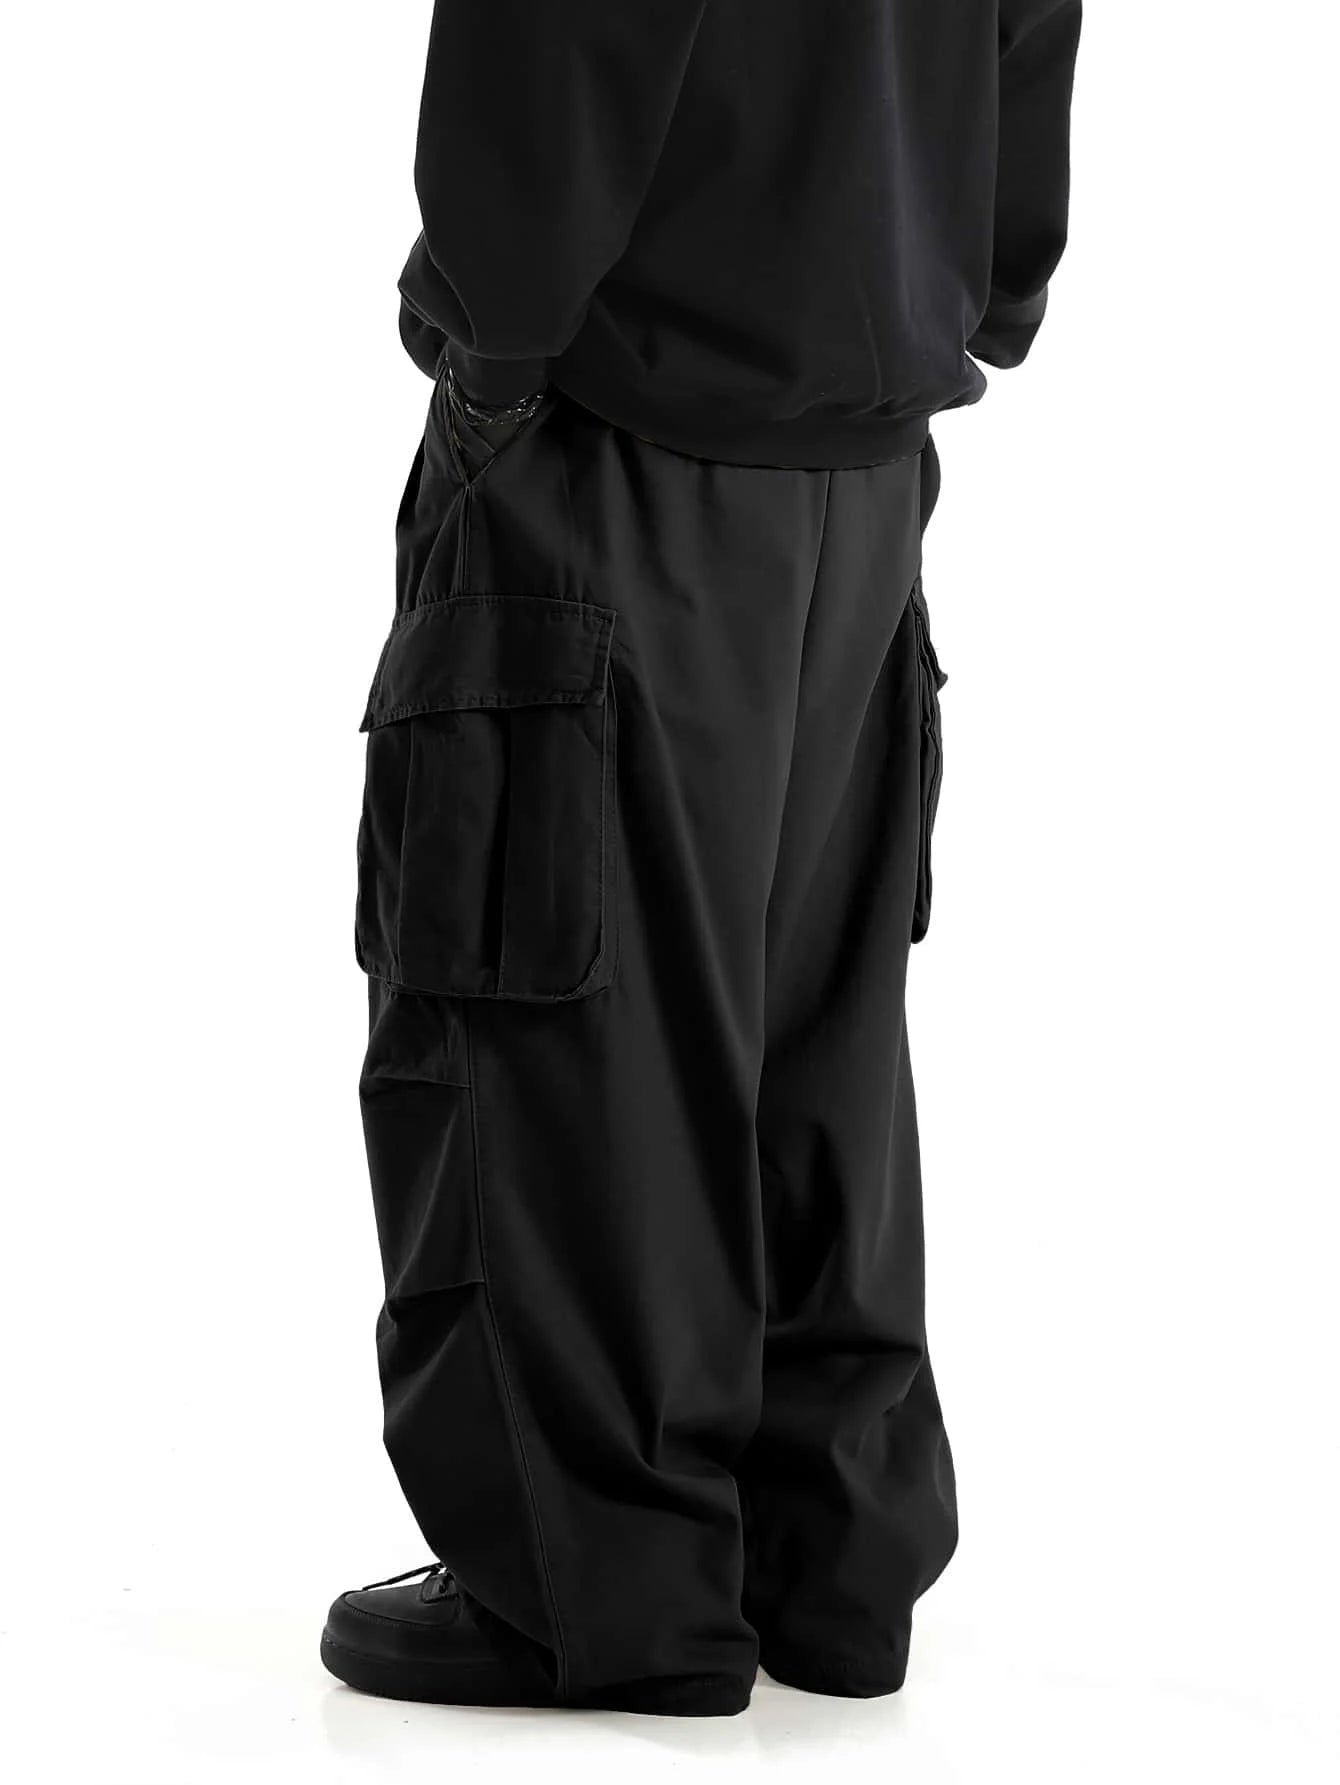 Classic Design Multi Flap Pockets Cargo Pants,Men's Loose Fit Drawstring Cargo Pants，For Skateboarding,Street,Outdoor Camping